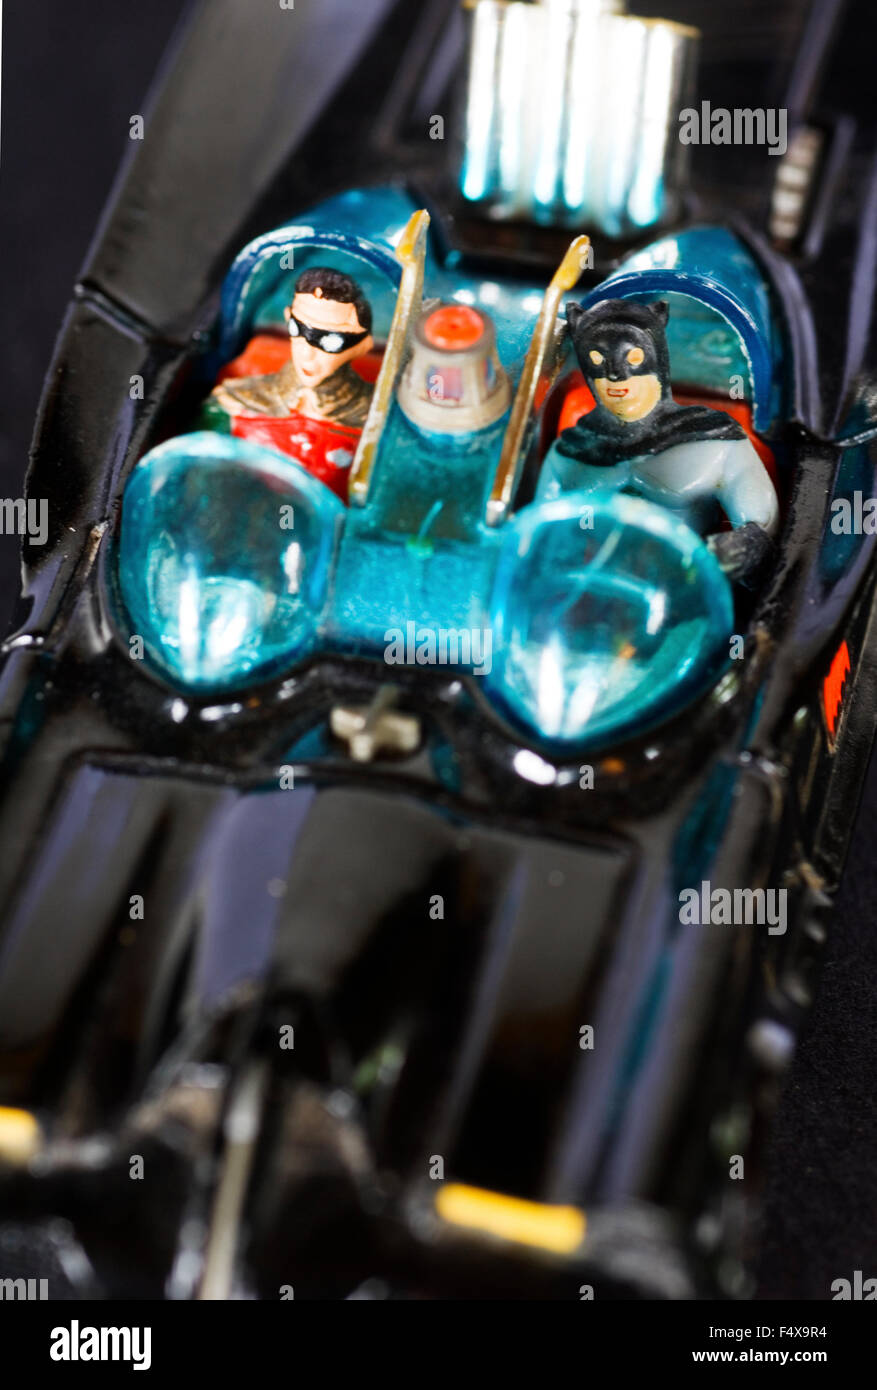 Batman and Robin in the toy Batmobile. Stock Photo